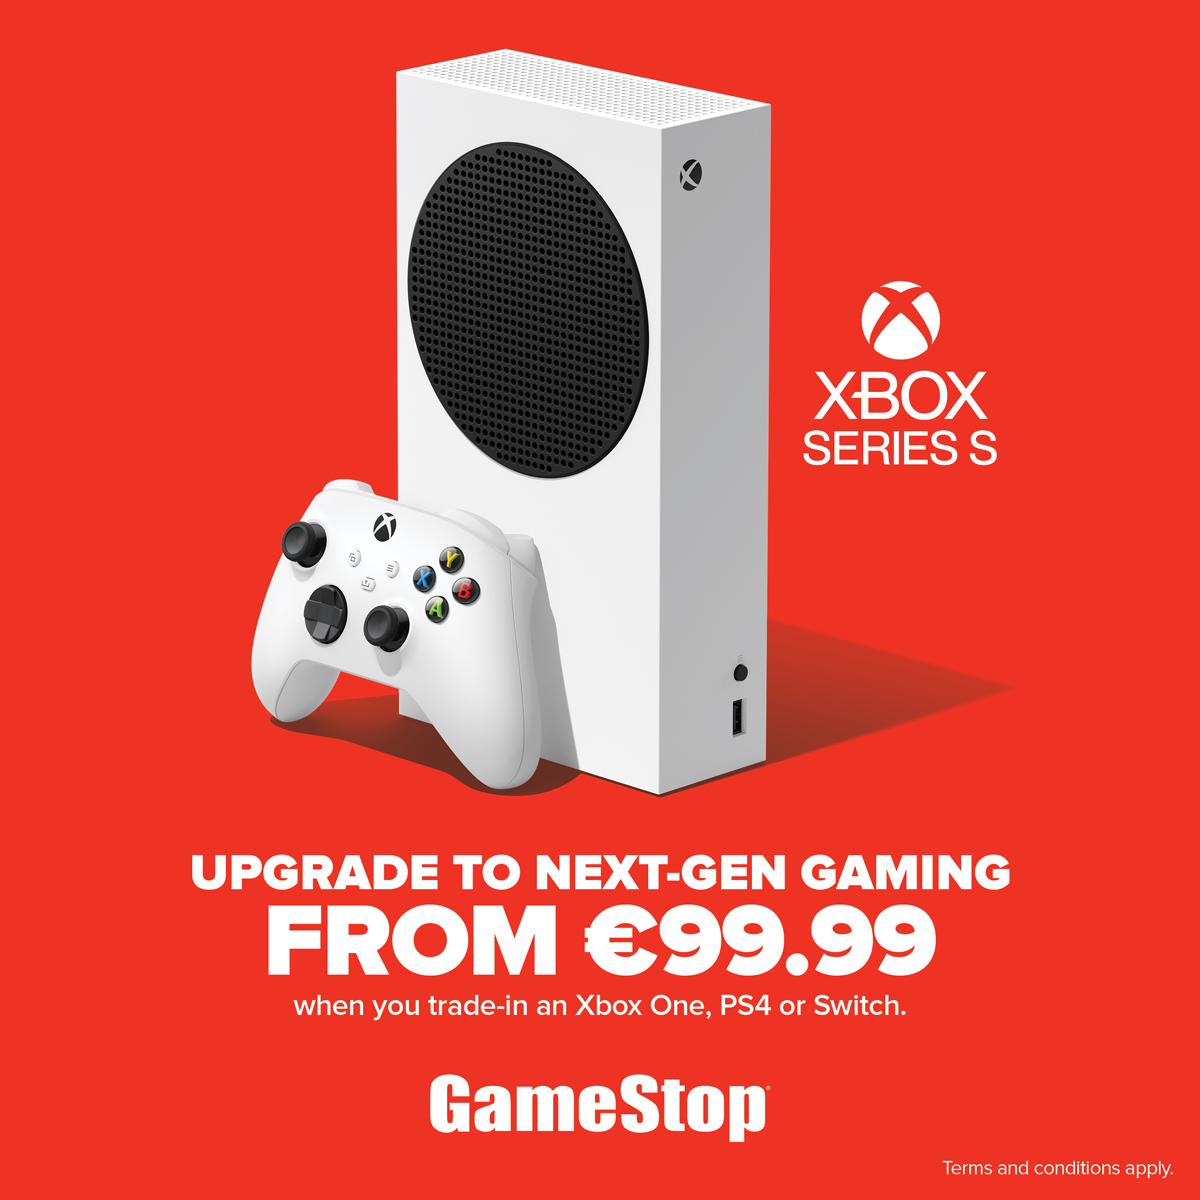 Upgrade to next-gen gaming and get an Xbox Series S from €99.99 at GameStop